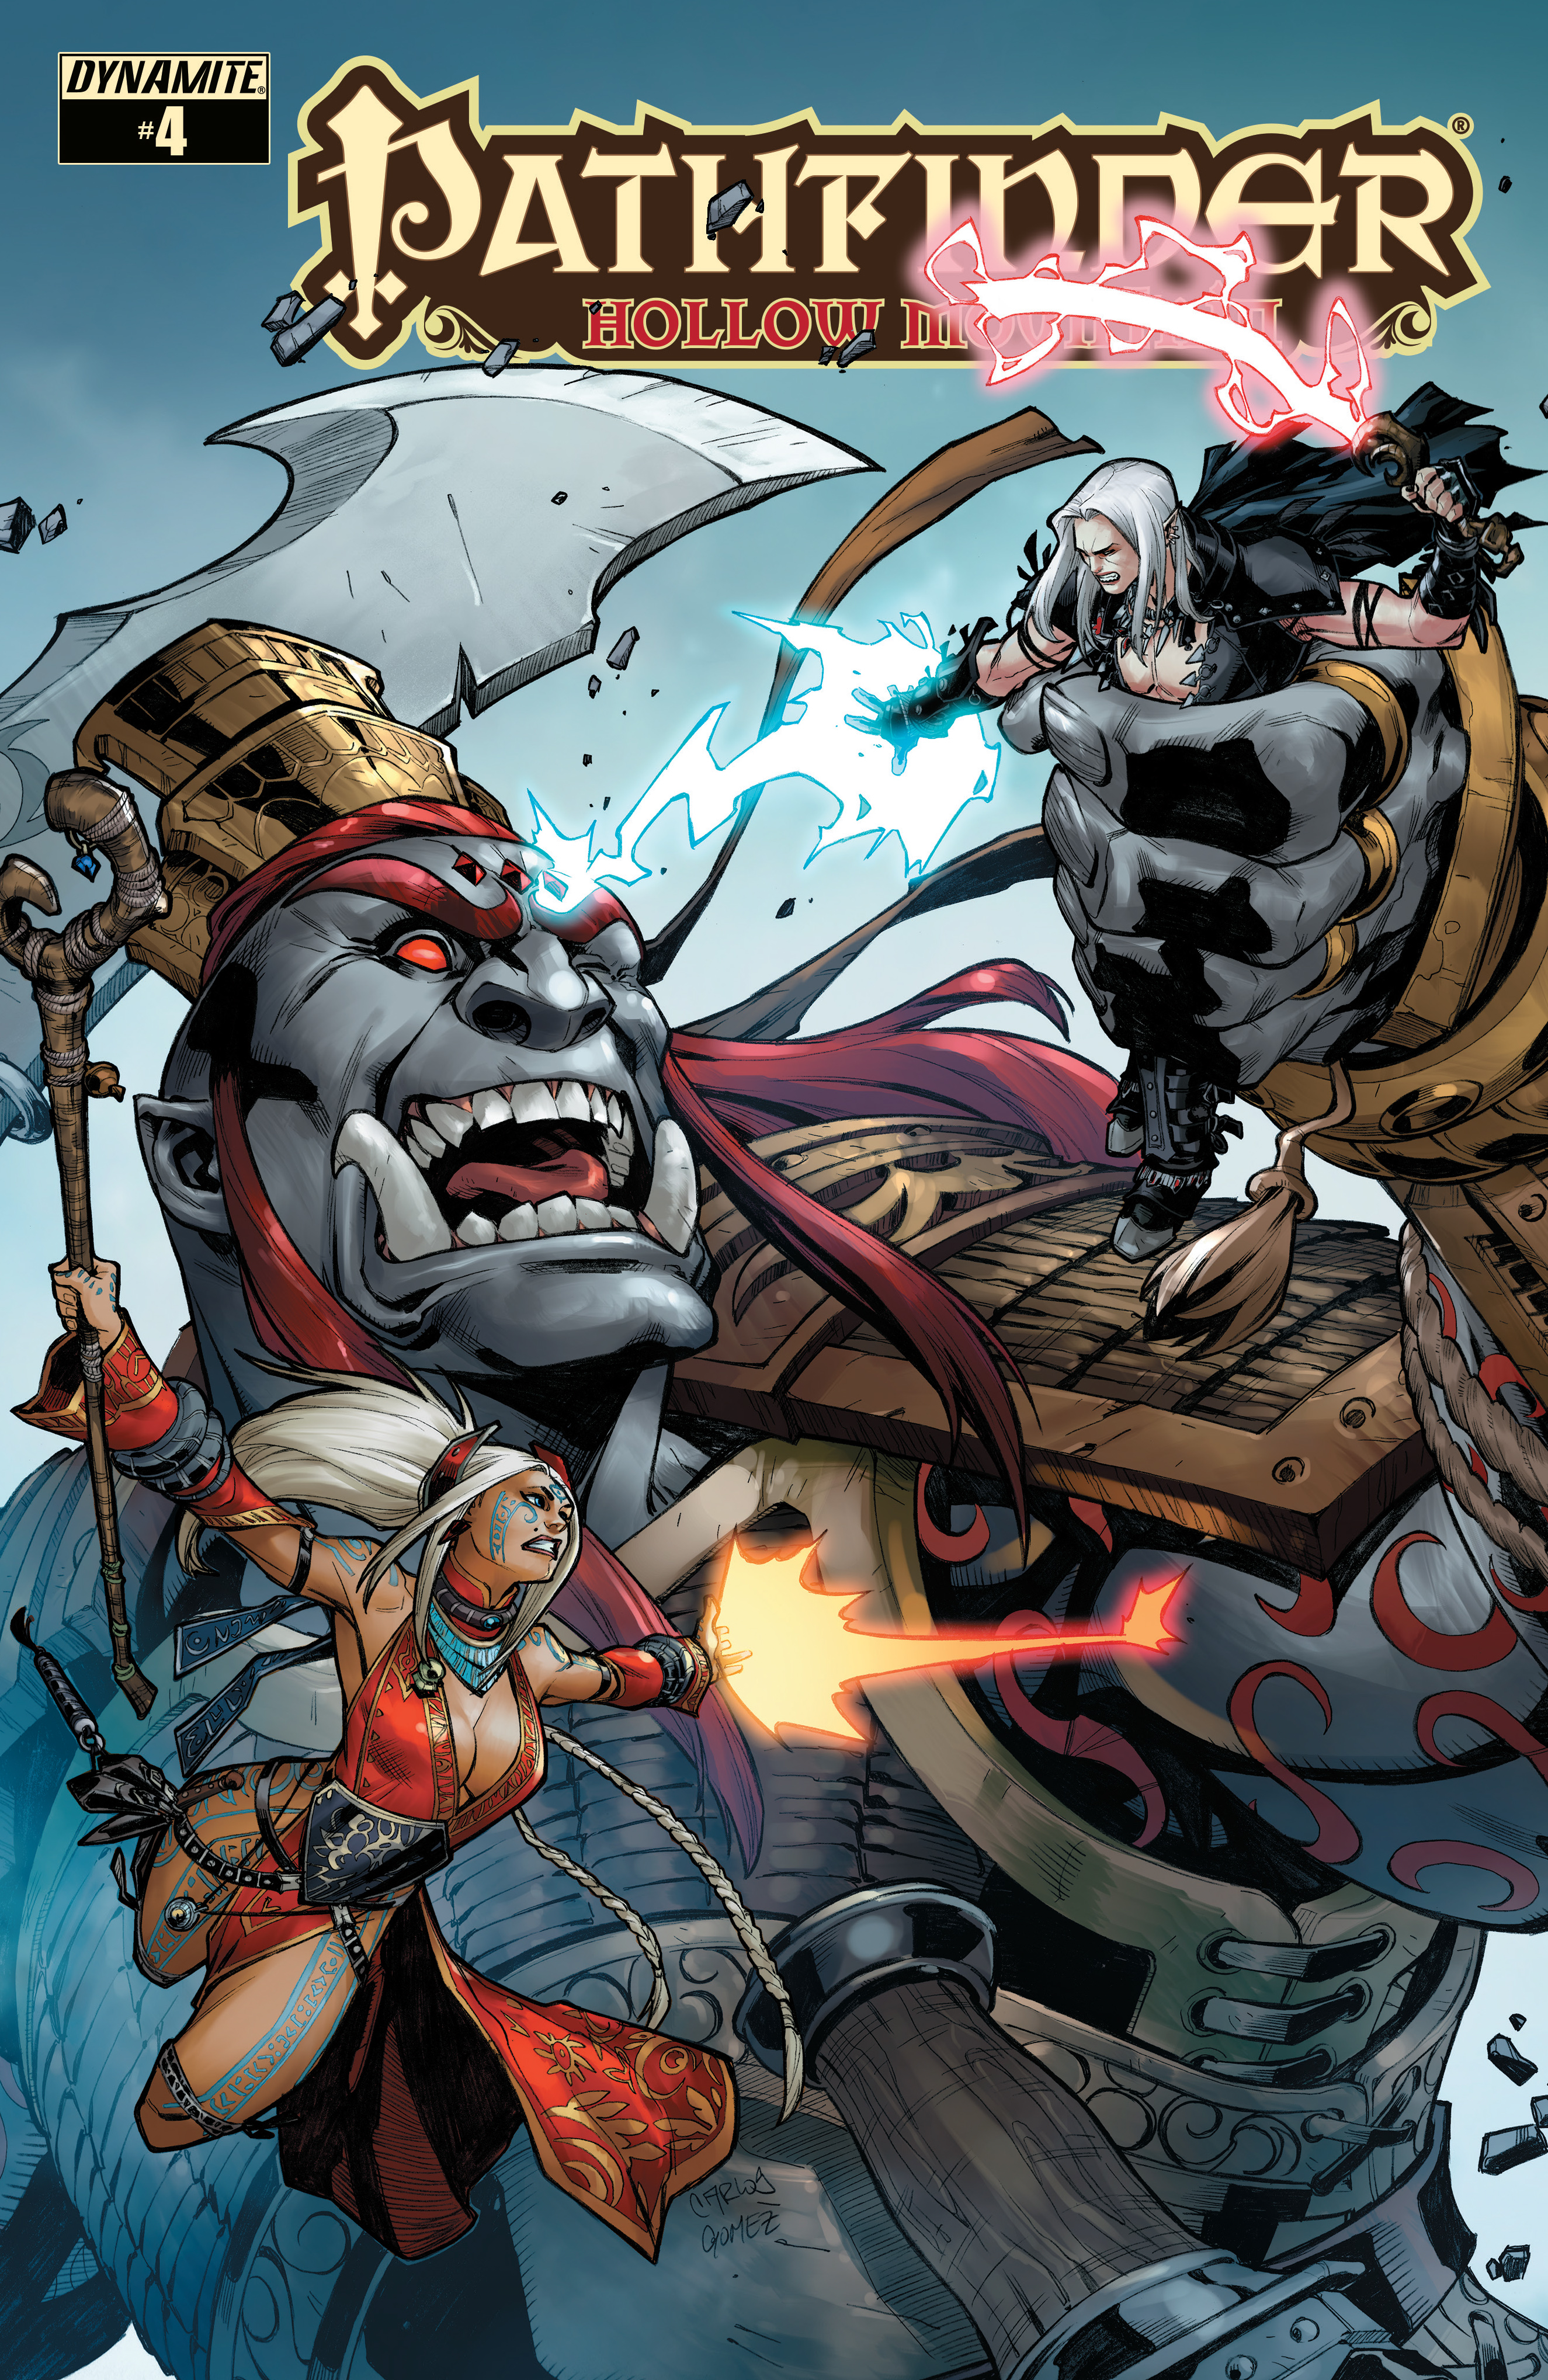 Read online Pathfinder: Hollow Mountain comic -  Issue #4 - 1